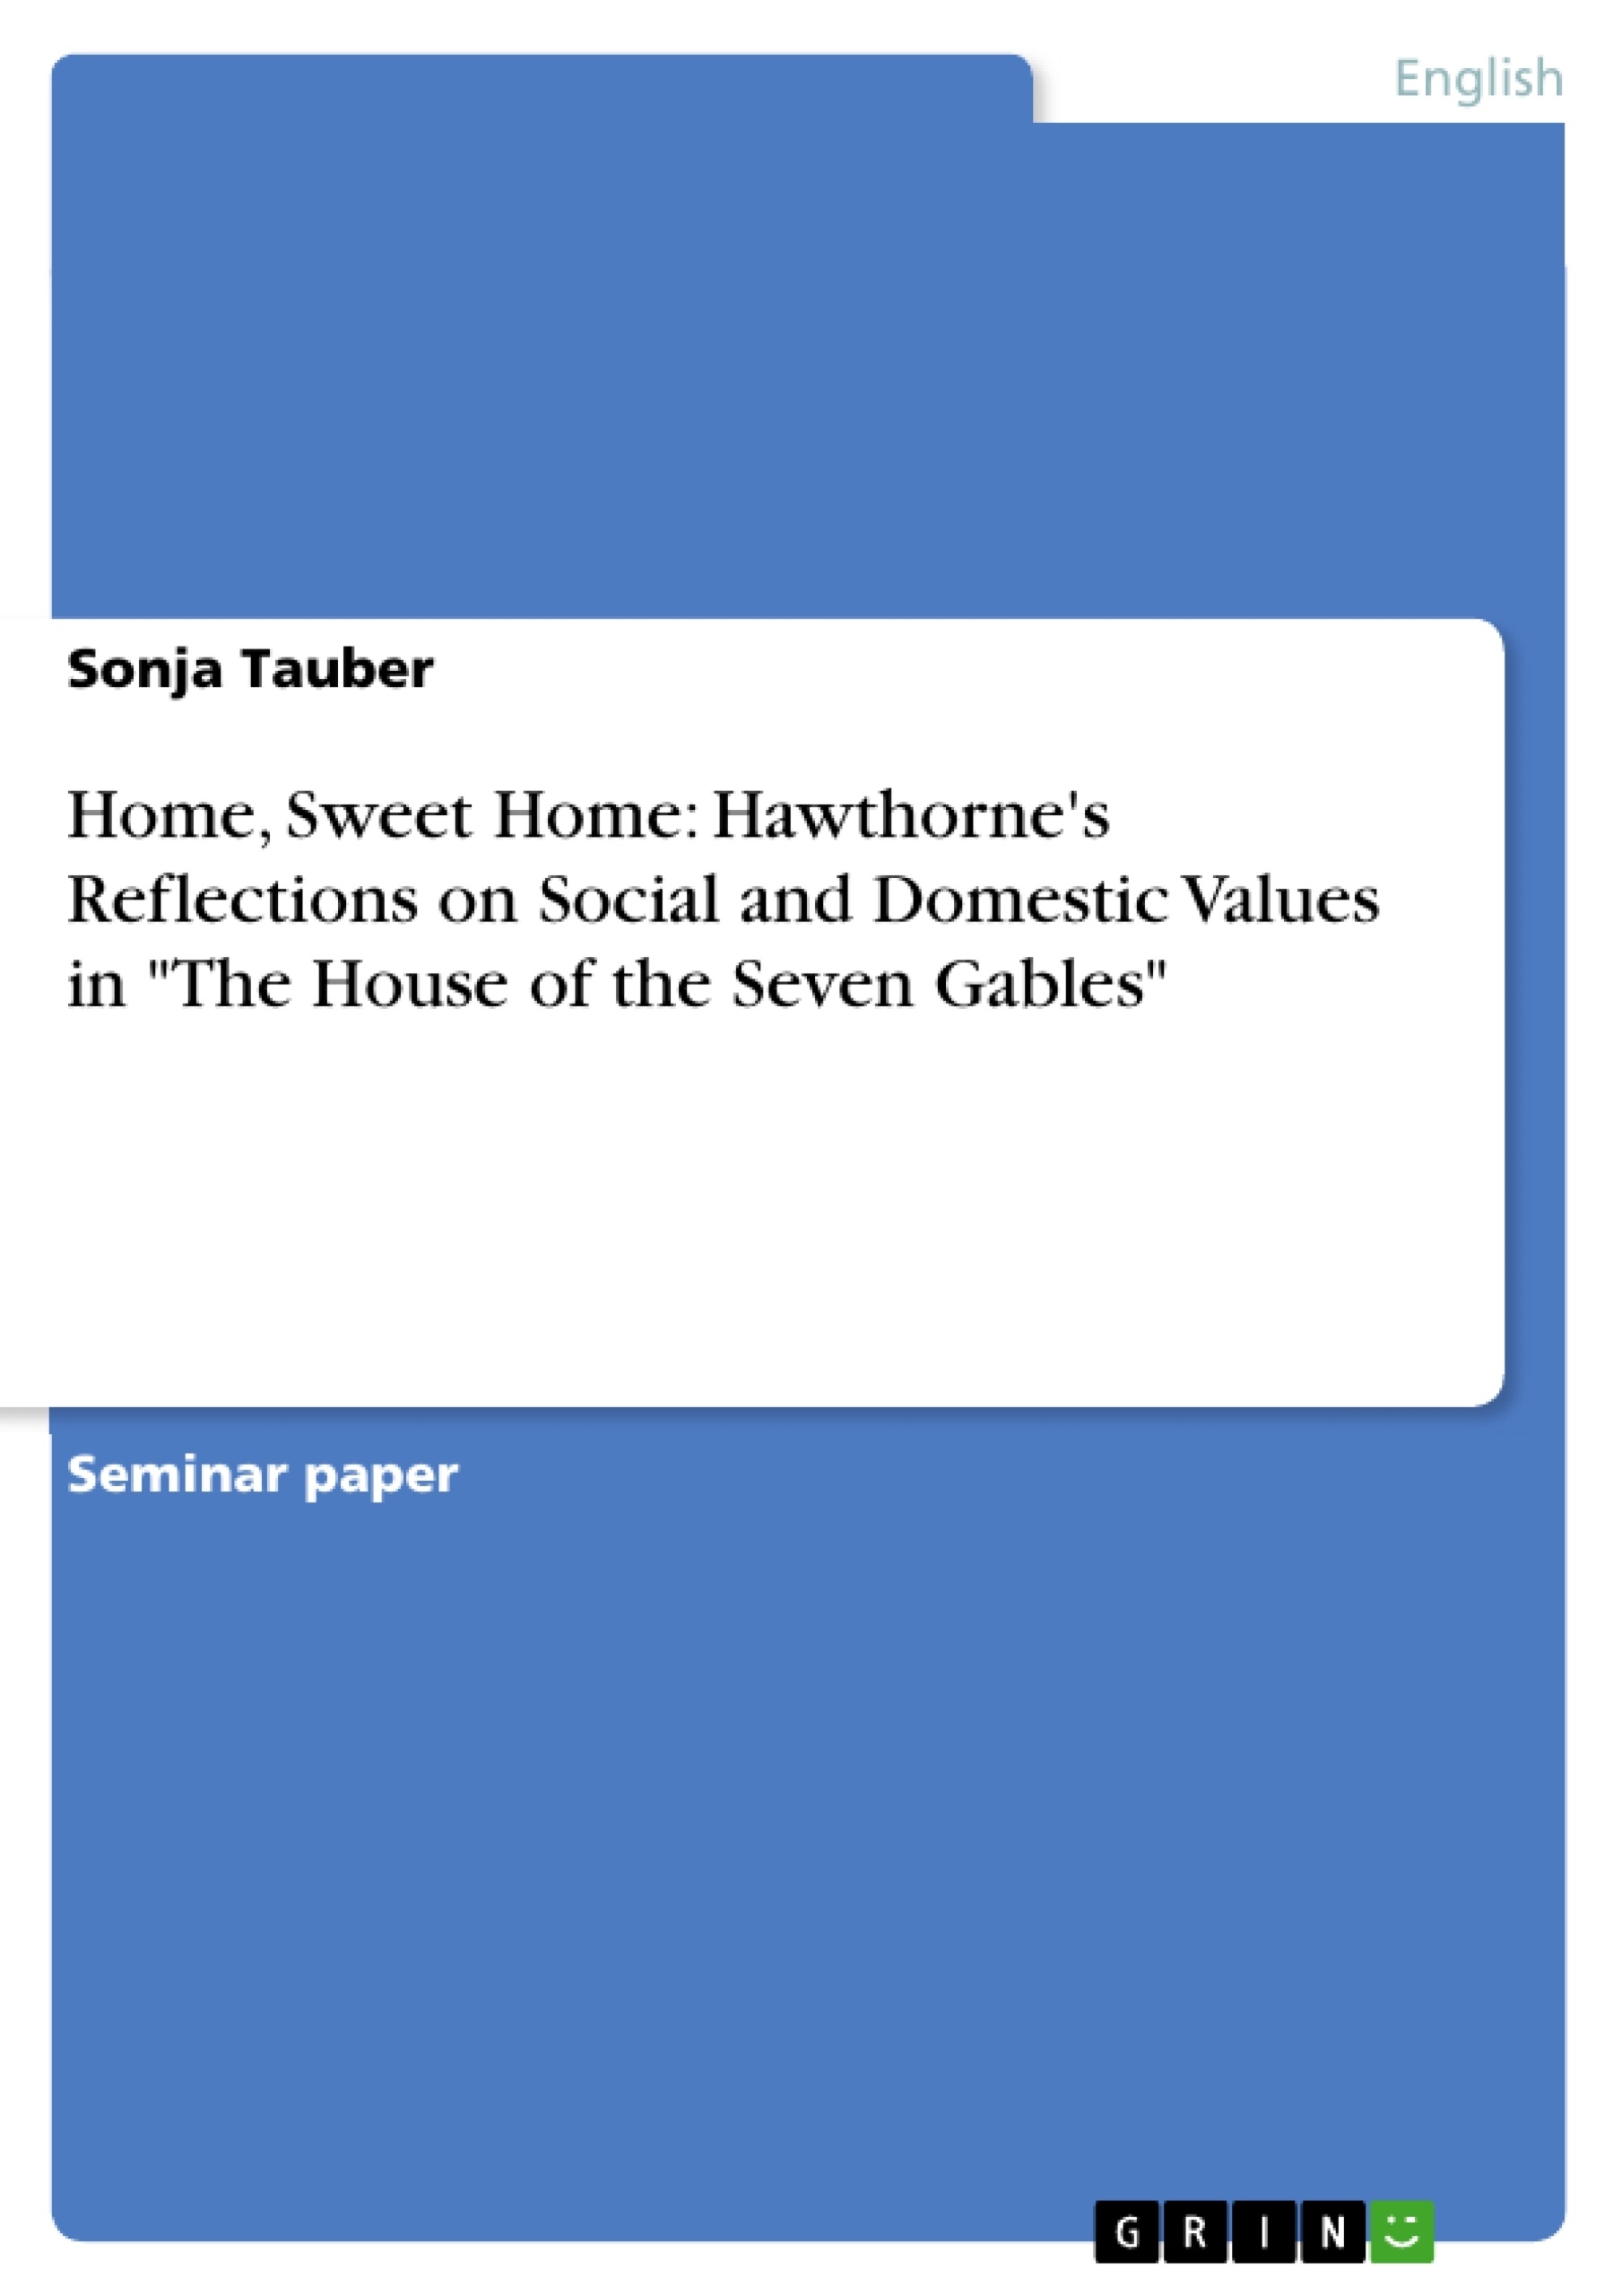 Título: Home, Sweet Home: Hawthorne's Reflections on Social and Domestic Values in "The House of the Seven Gables"